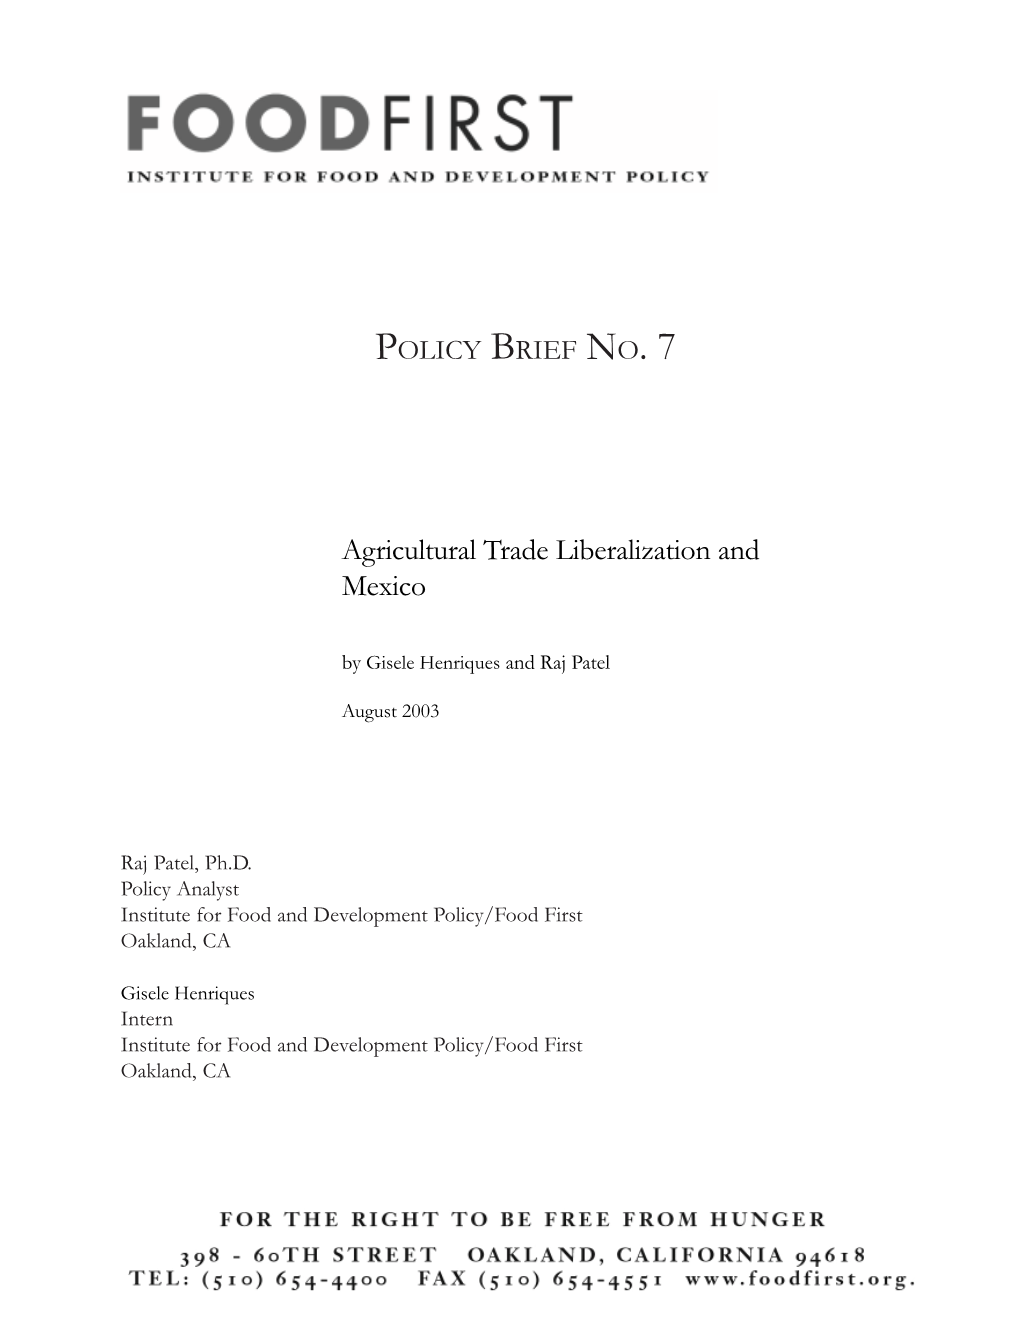 PB7 Agricultural Trade Liberalization and Mexico Patel and Henriques2003